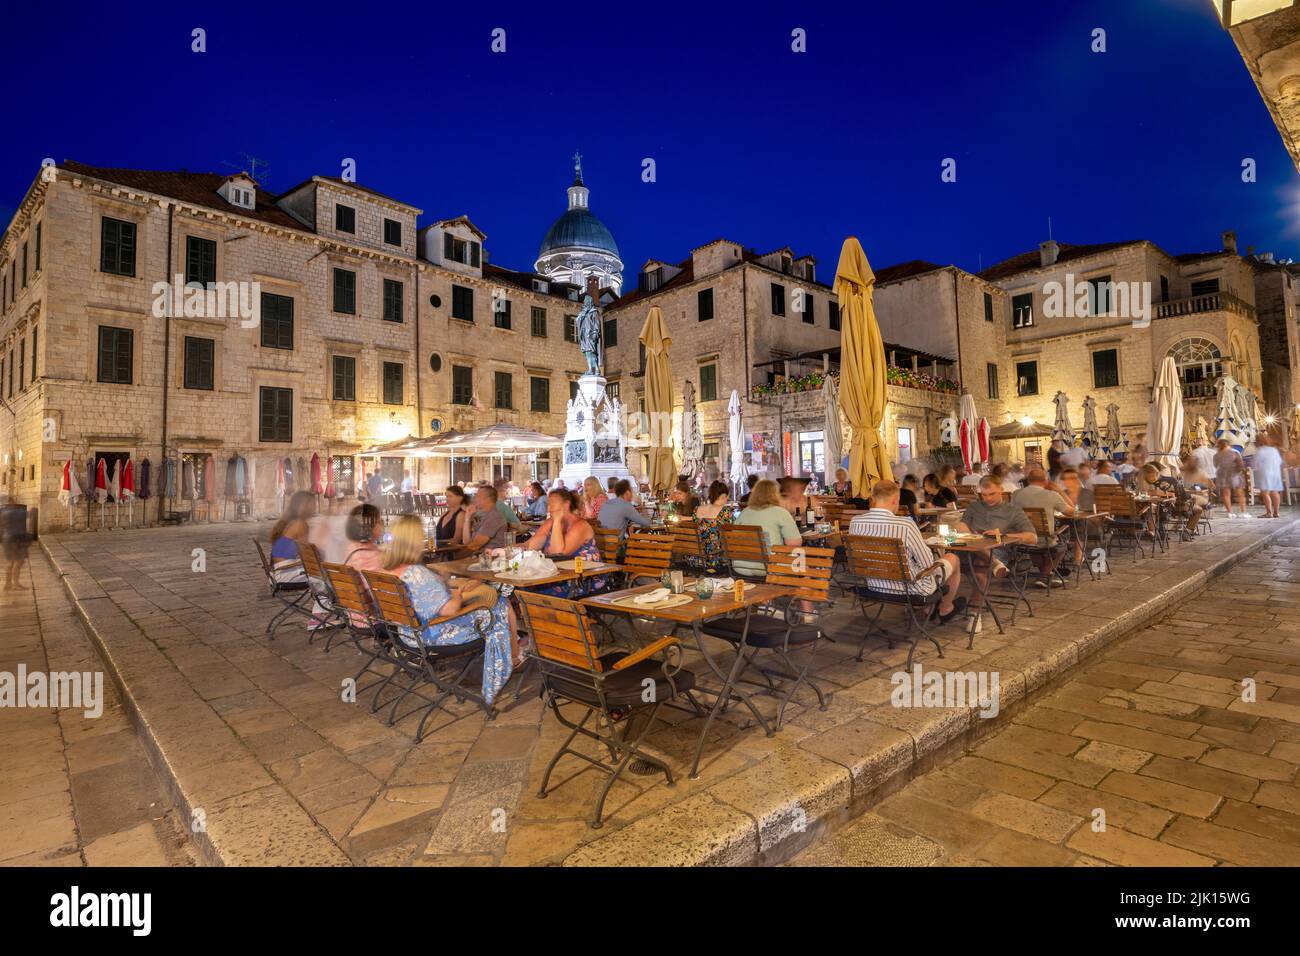 People eating at outdoor restaurant at night in the old town, Dubrovnik, Croatia, Europe Stock Photo